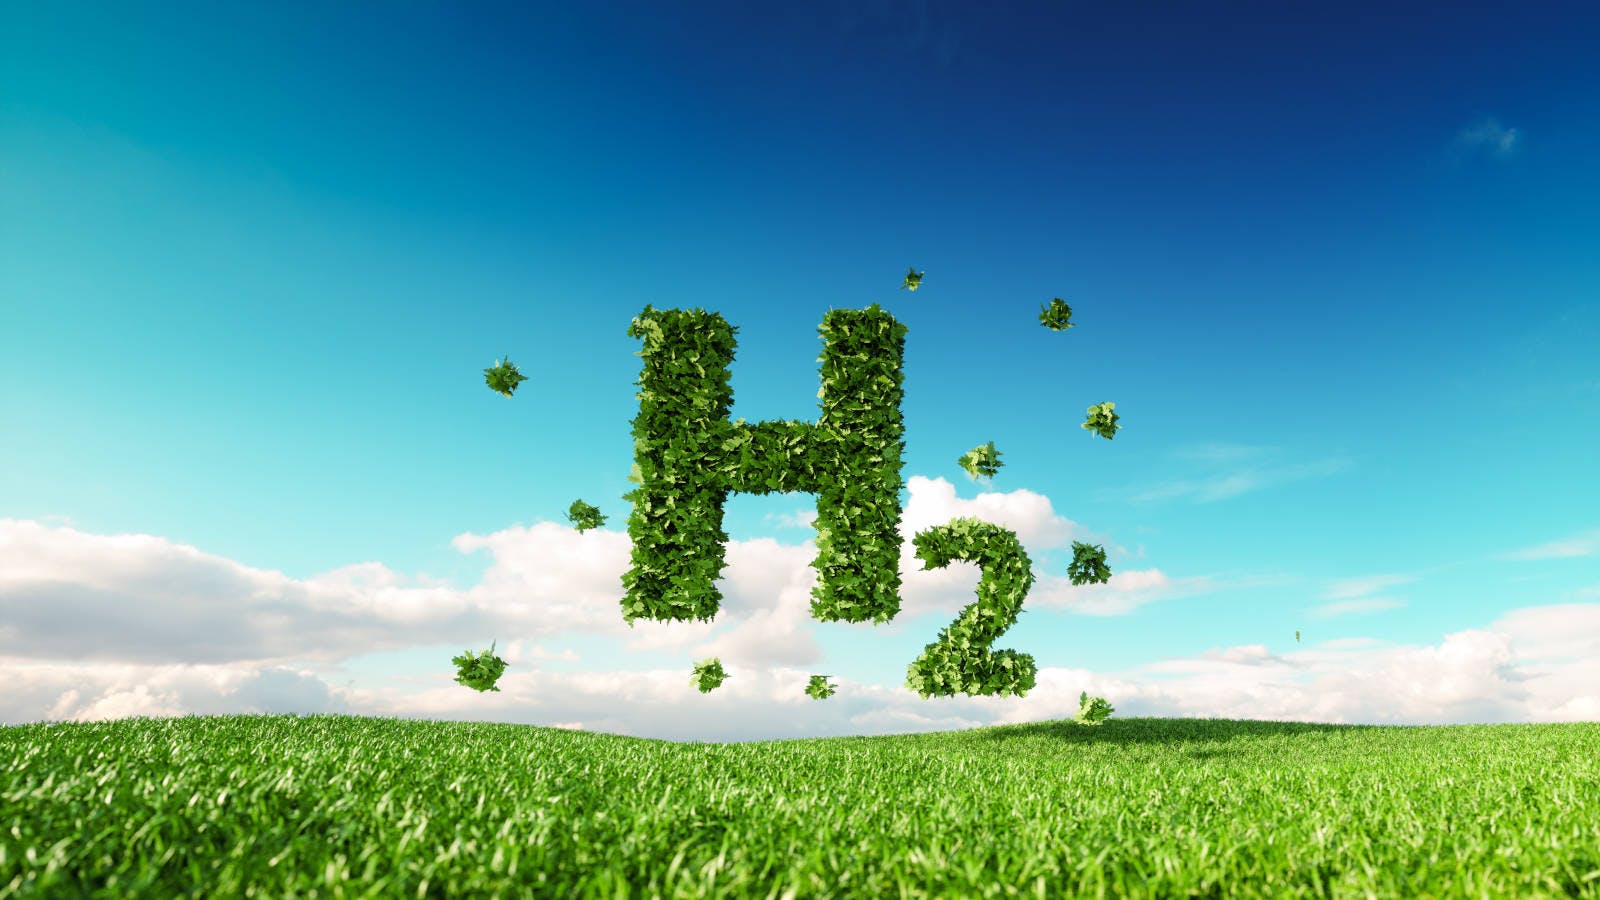 Green-colored H2 hydrogen formula over grass